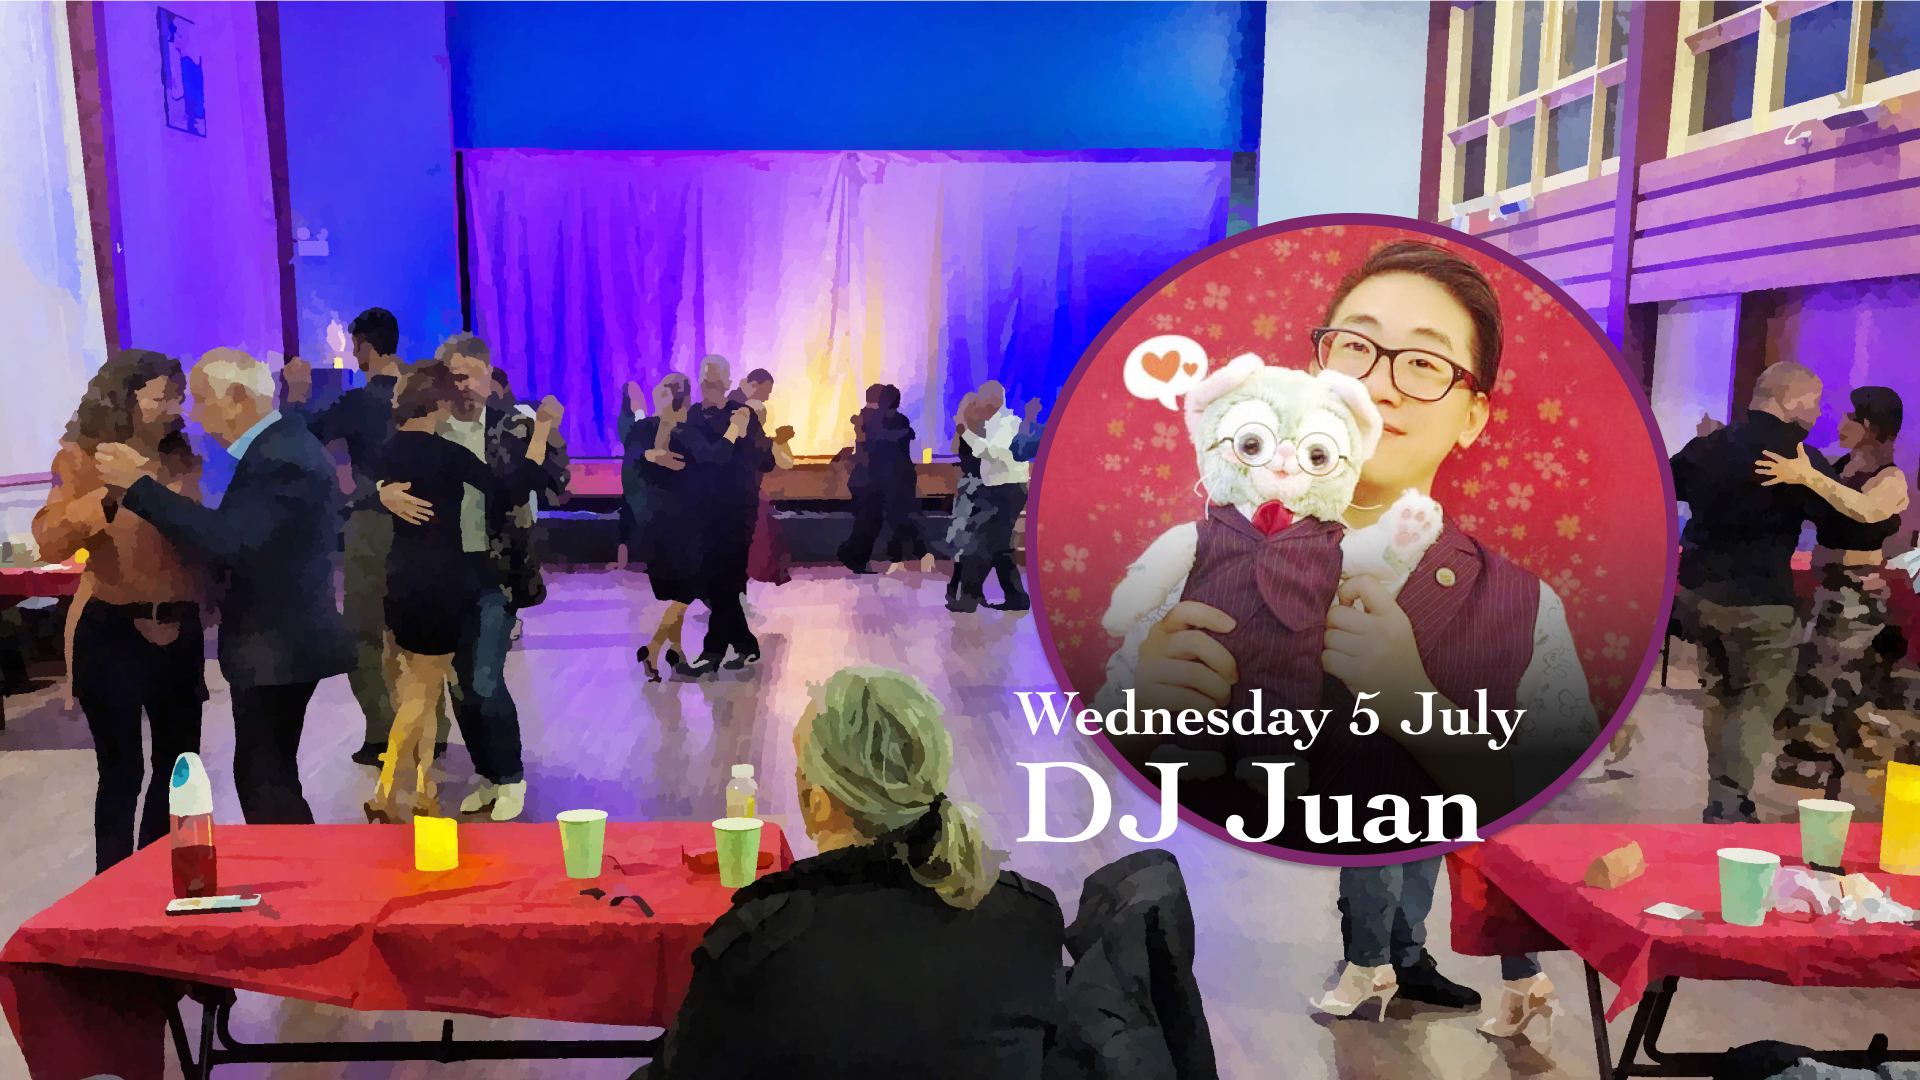 DJ Juan plays for Synergy on Wednesday 5 July